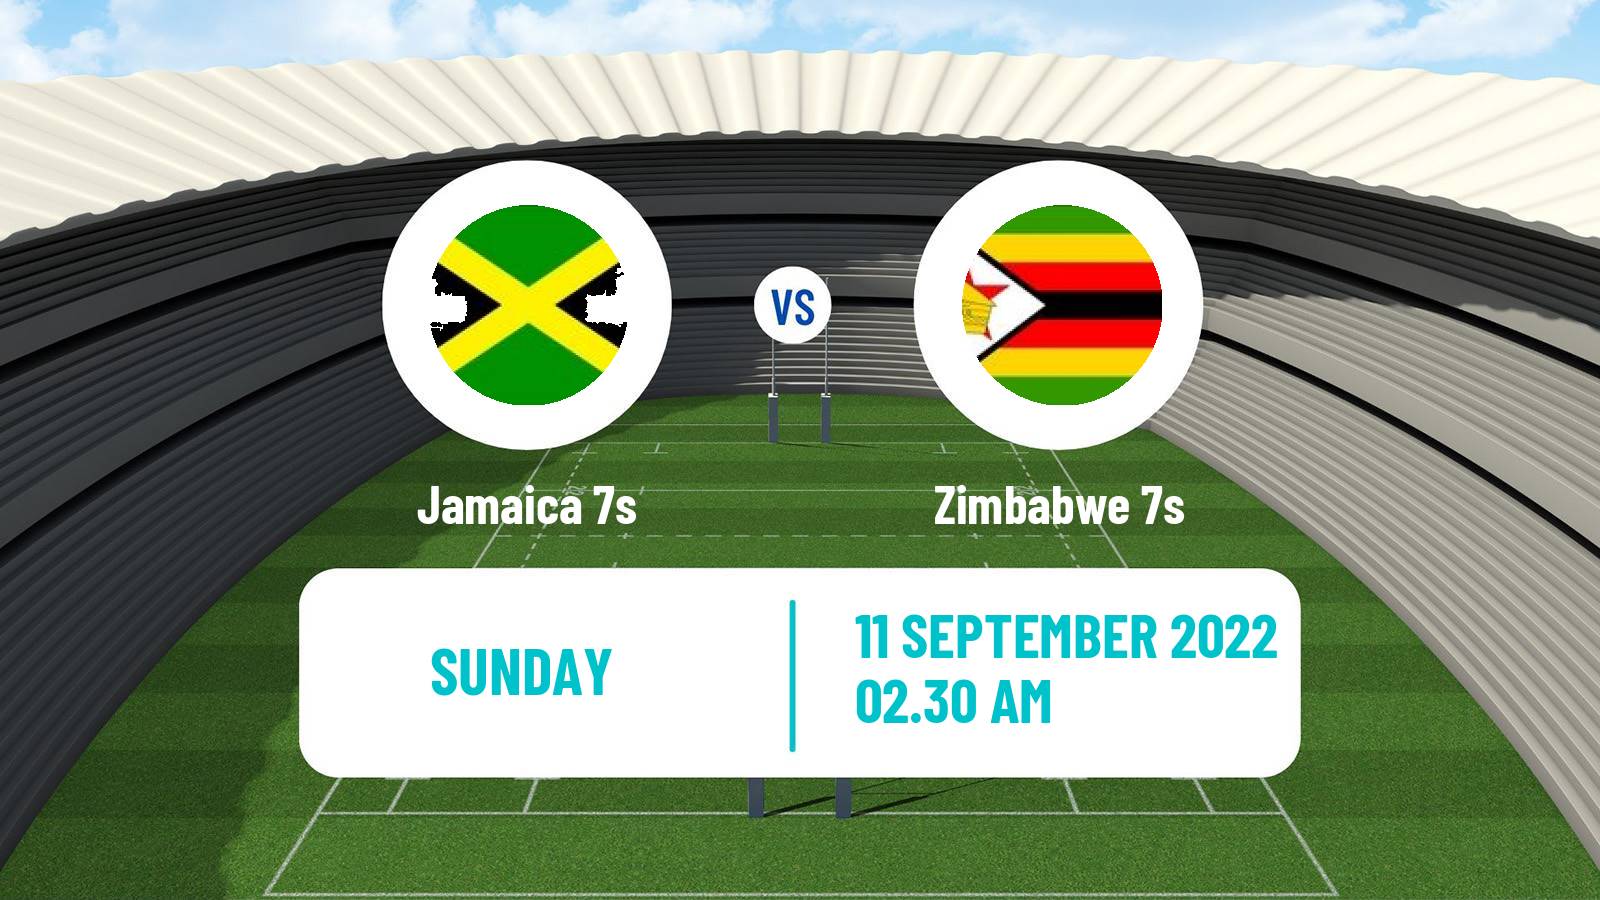 Rugby union Sevens World Cup Jamaica 7s - Zimbabwe 7s